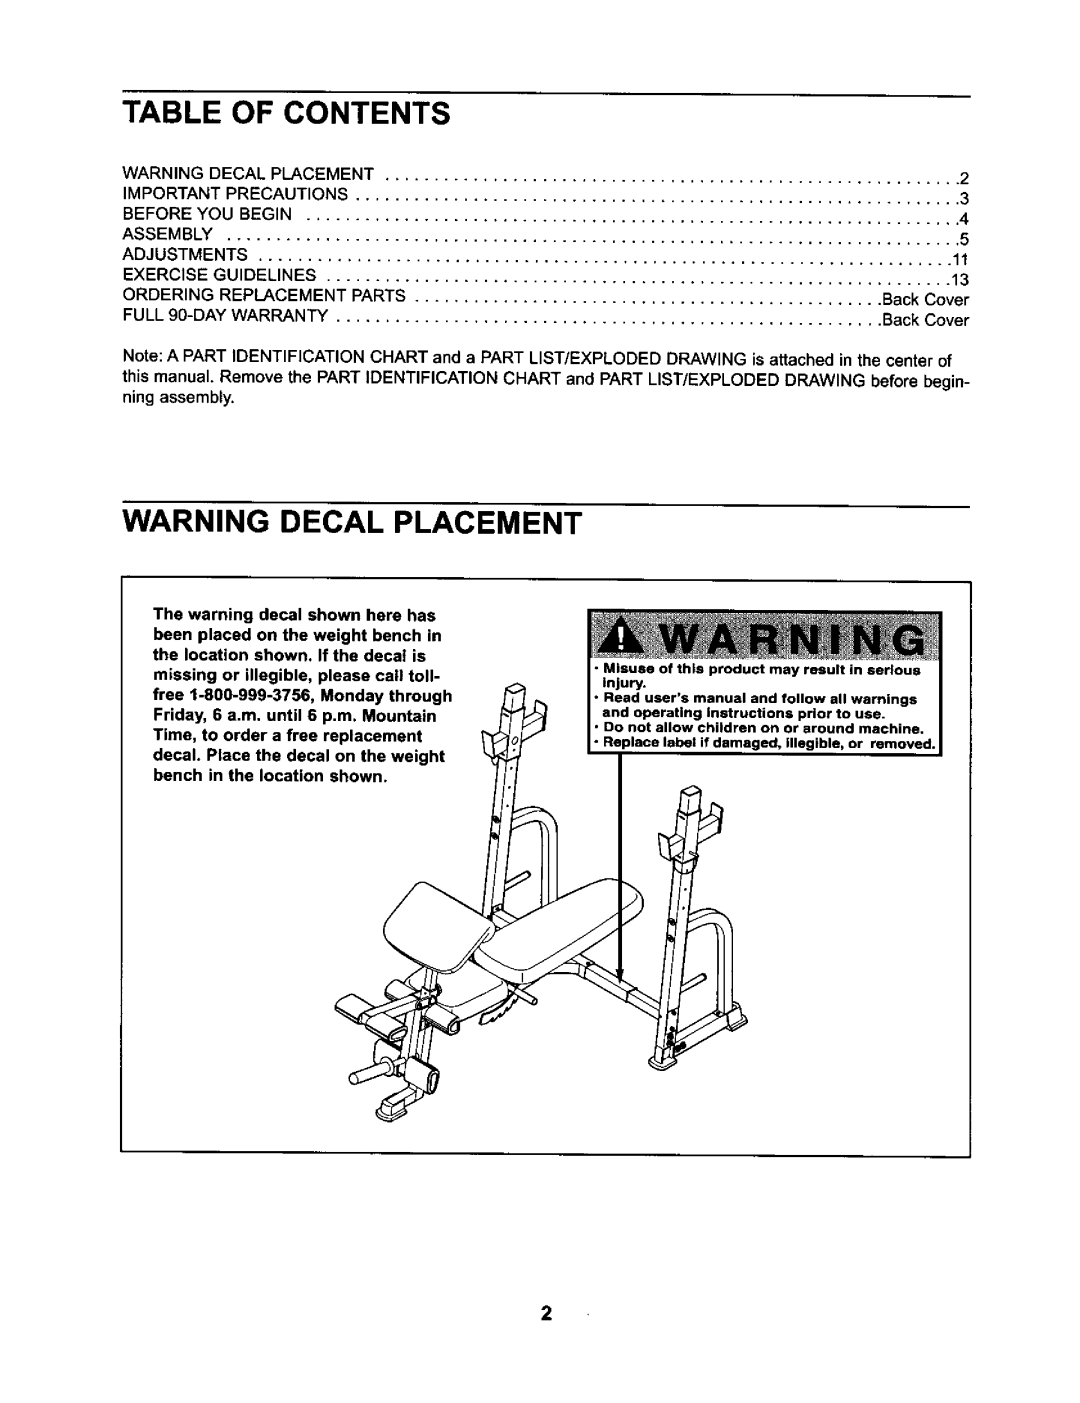 ProForm 831.15032 Table Of Contents, Warning Decal Placement, Misuse of this product may result in serious injury 